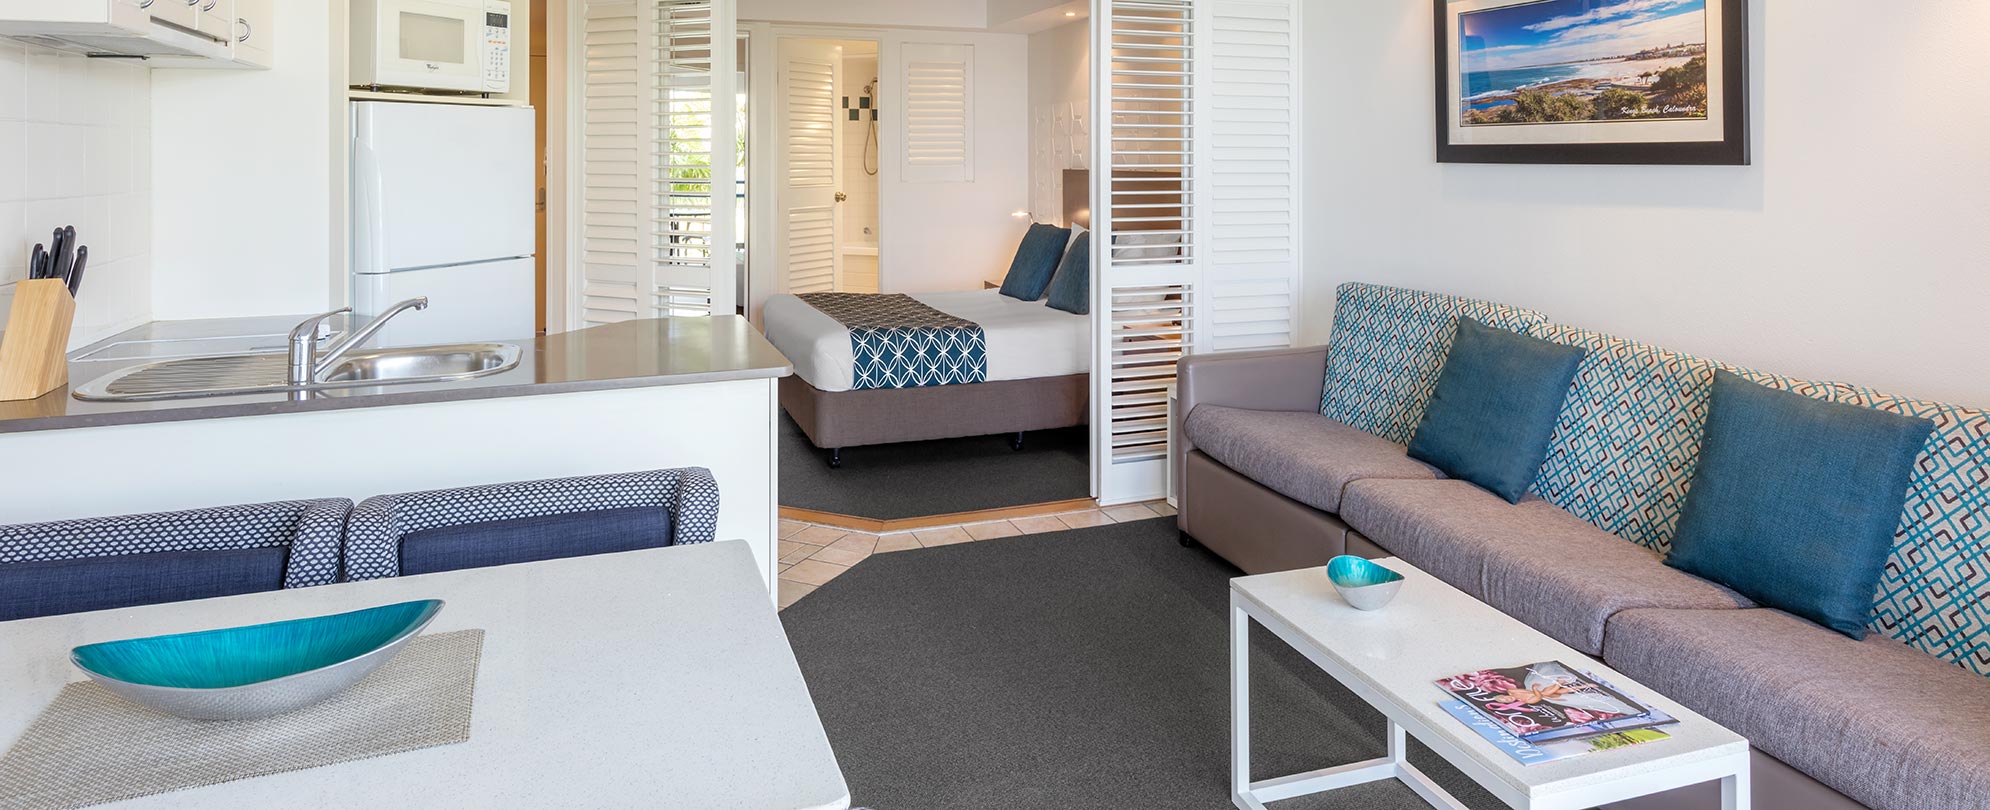 The dining, living, kitchen and bedroom are in a 1-bedroom suite at Club Wyndham Golden Beach.